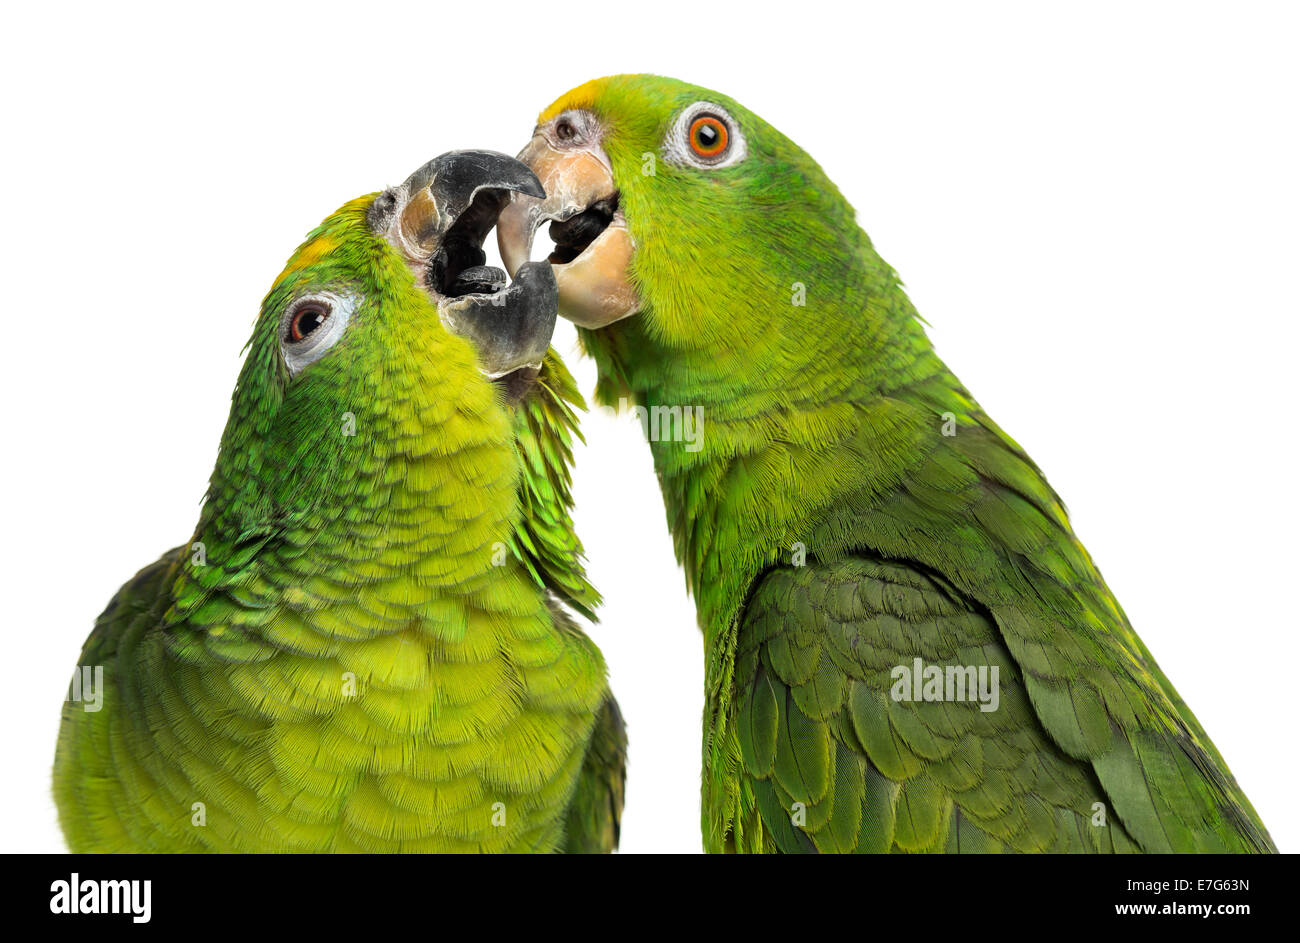 Close-up of a Panama Amazon and Yellow-crowned Amazon parrots pecking against white background Stock Photo